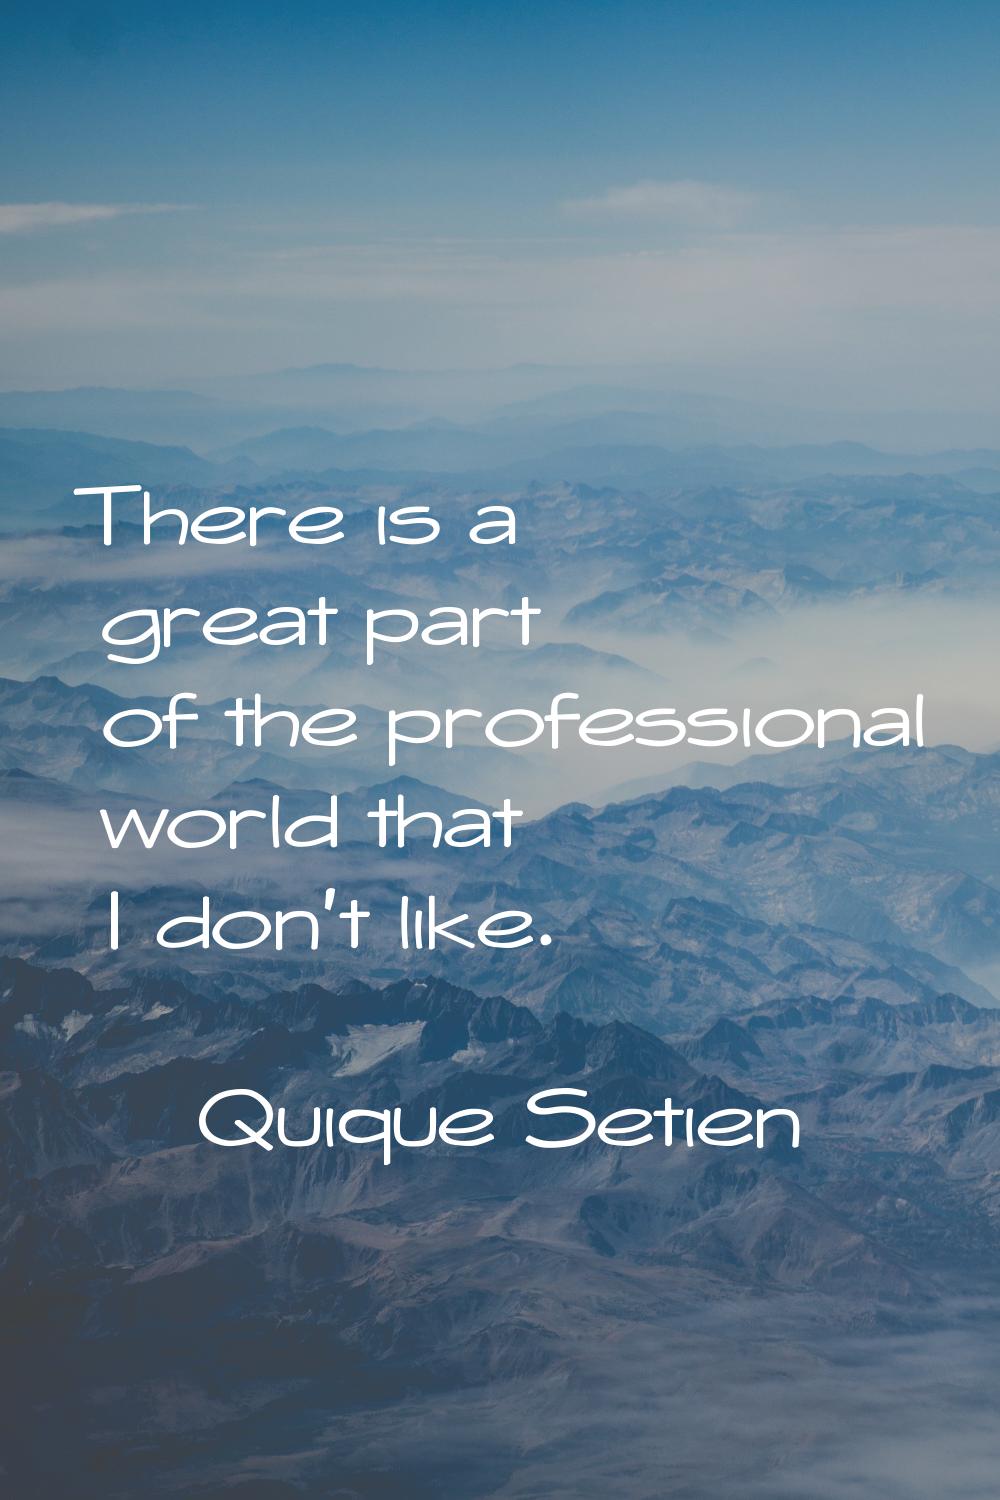 There is a great part of the professional world that I don't like.